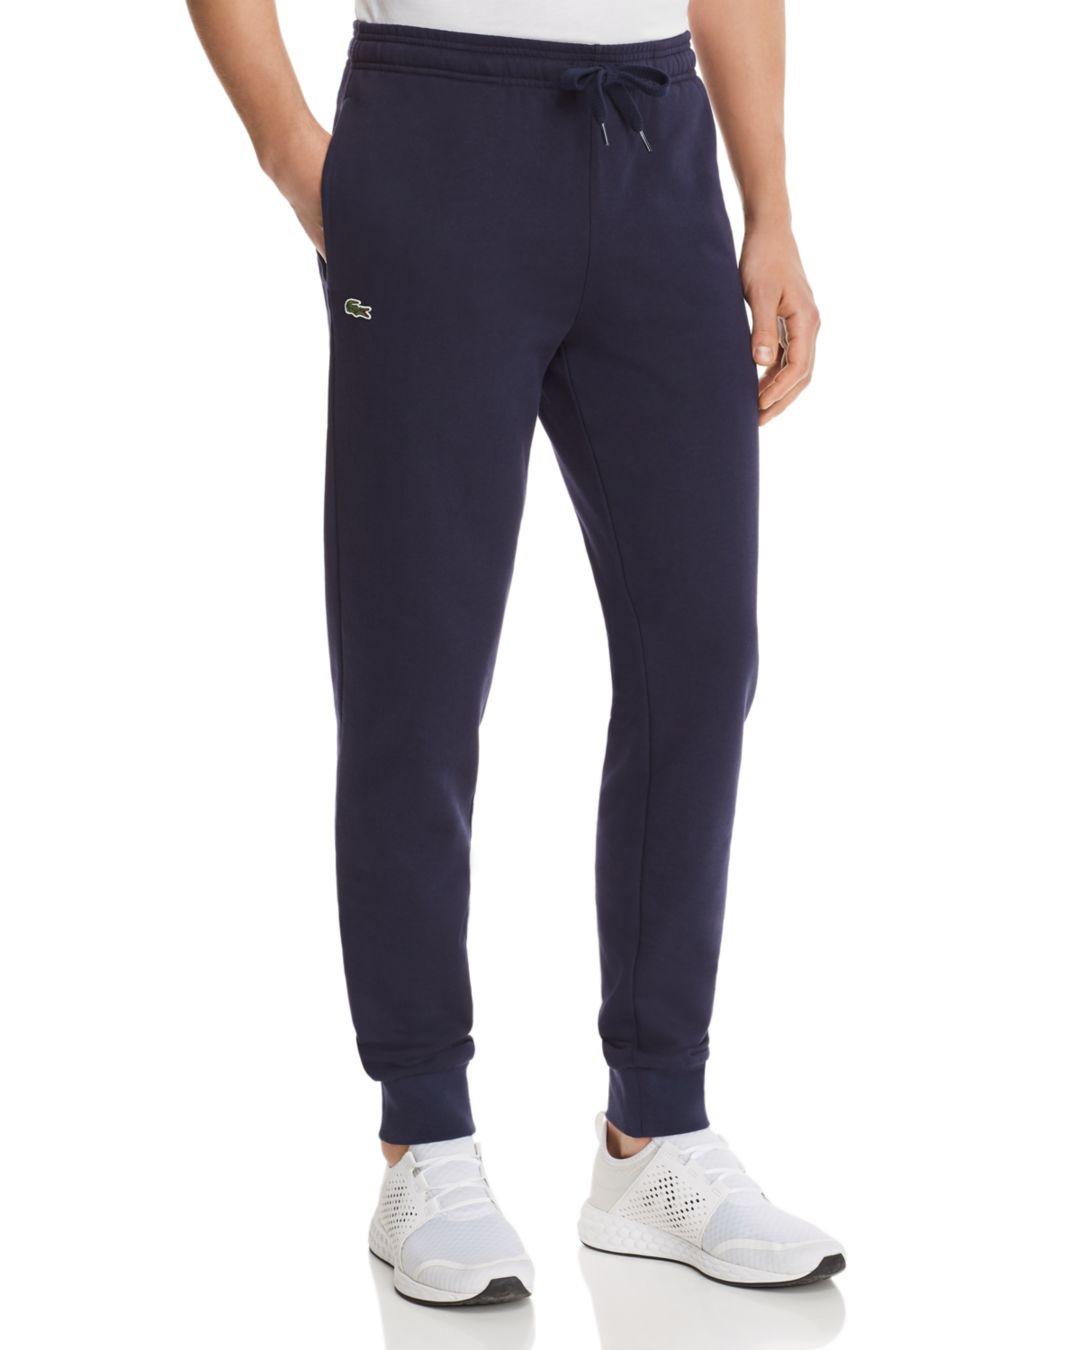 Lacoste Navy Track Pants on Sale, SAVE 43% - cityhygieneservices.co.uk